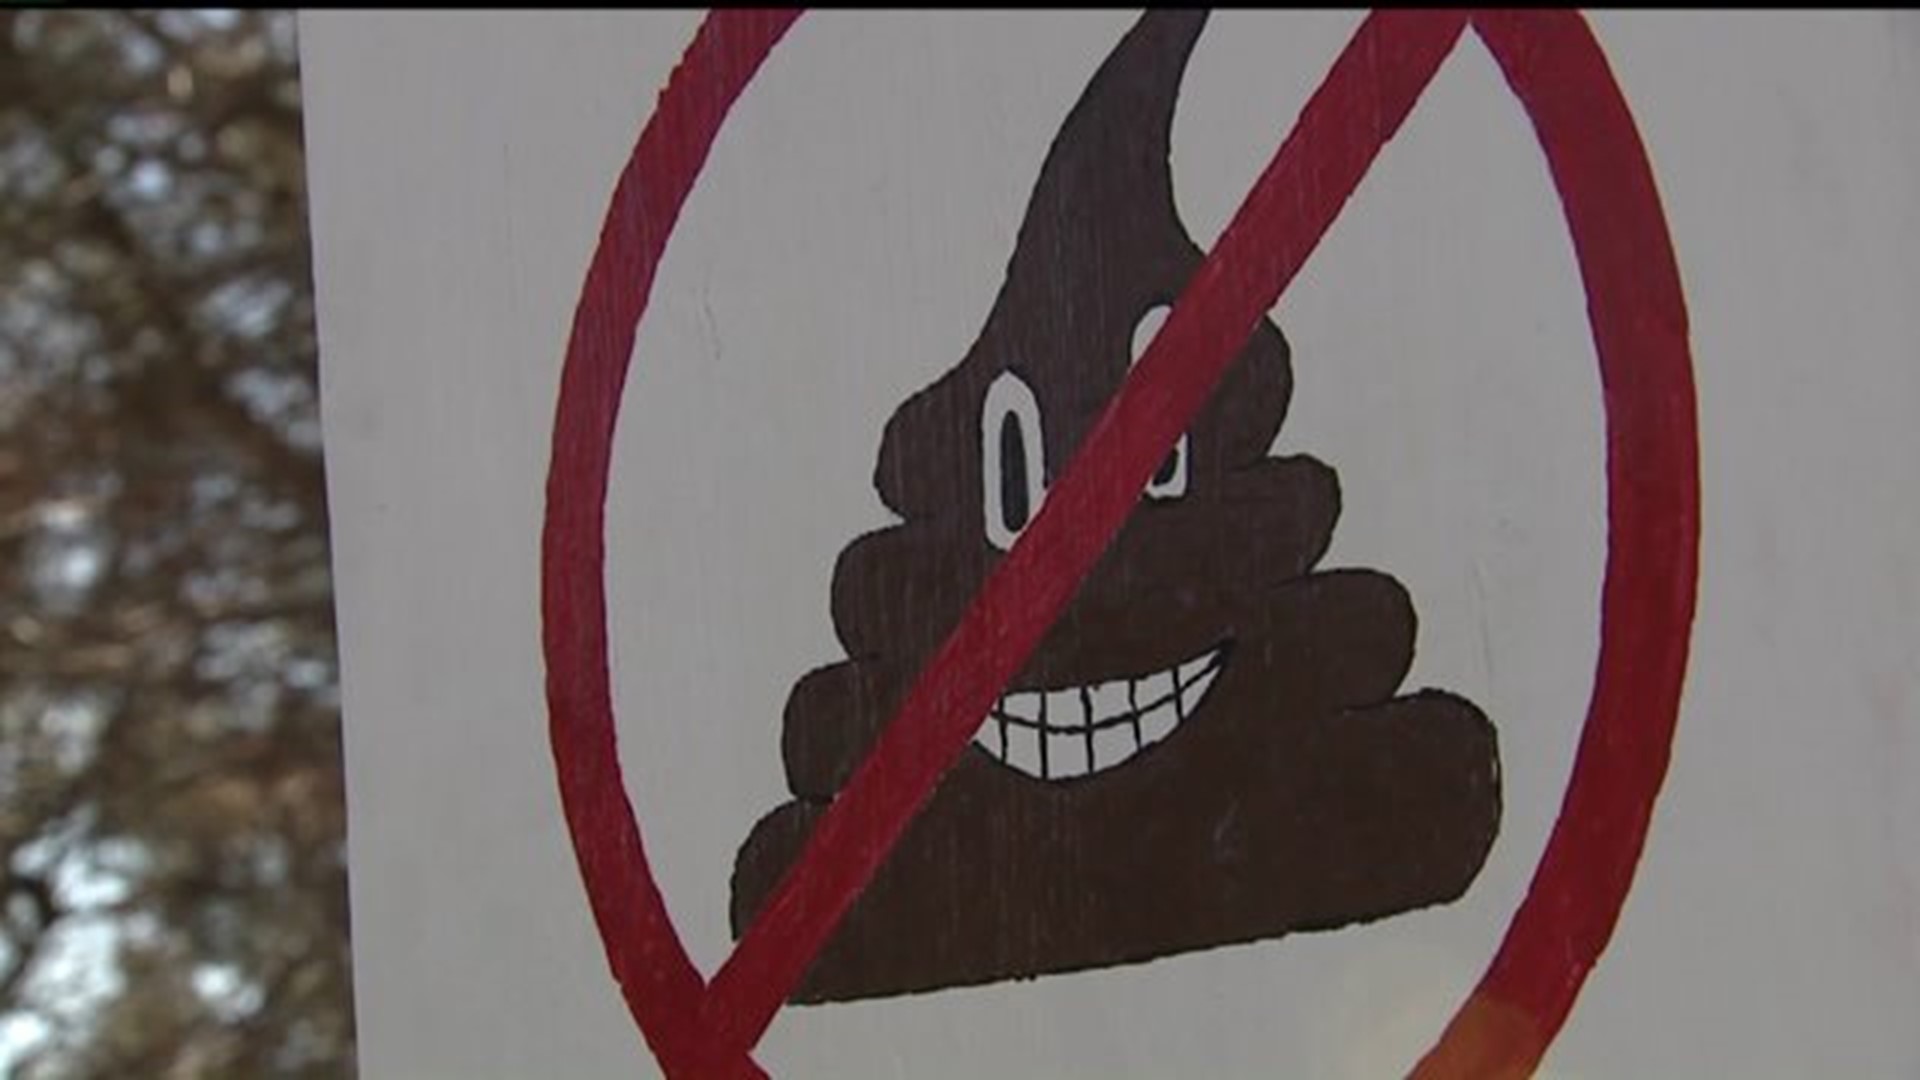 Community`s "Stop Pooping" signs are aimed at people, not pets